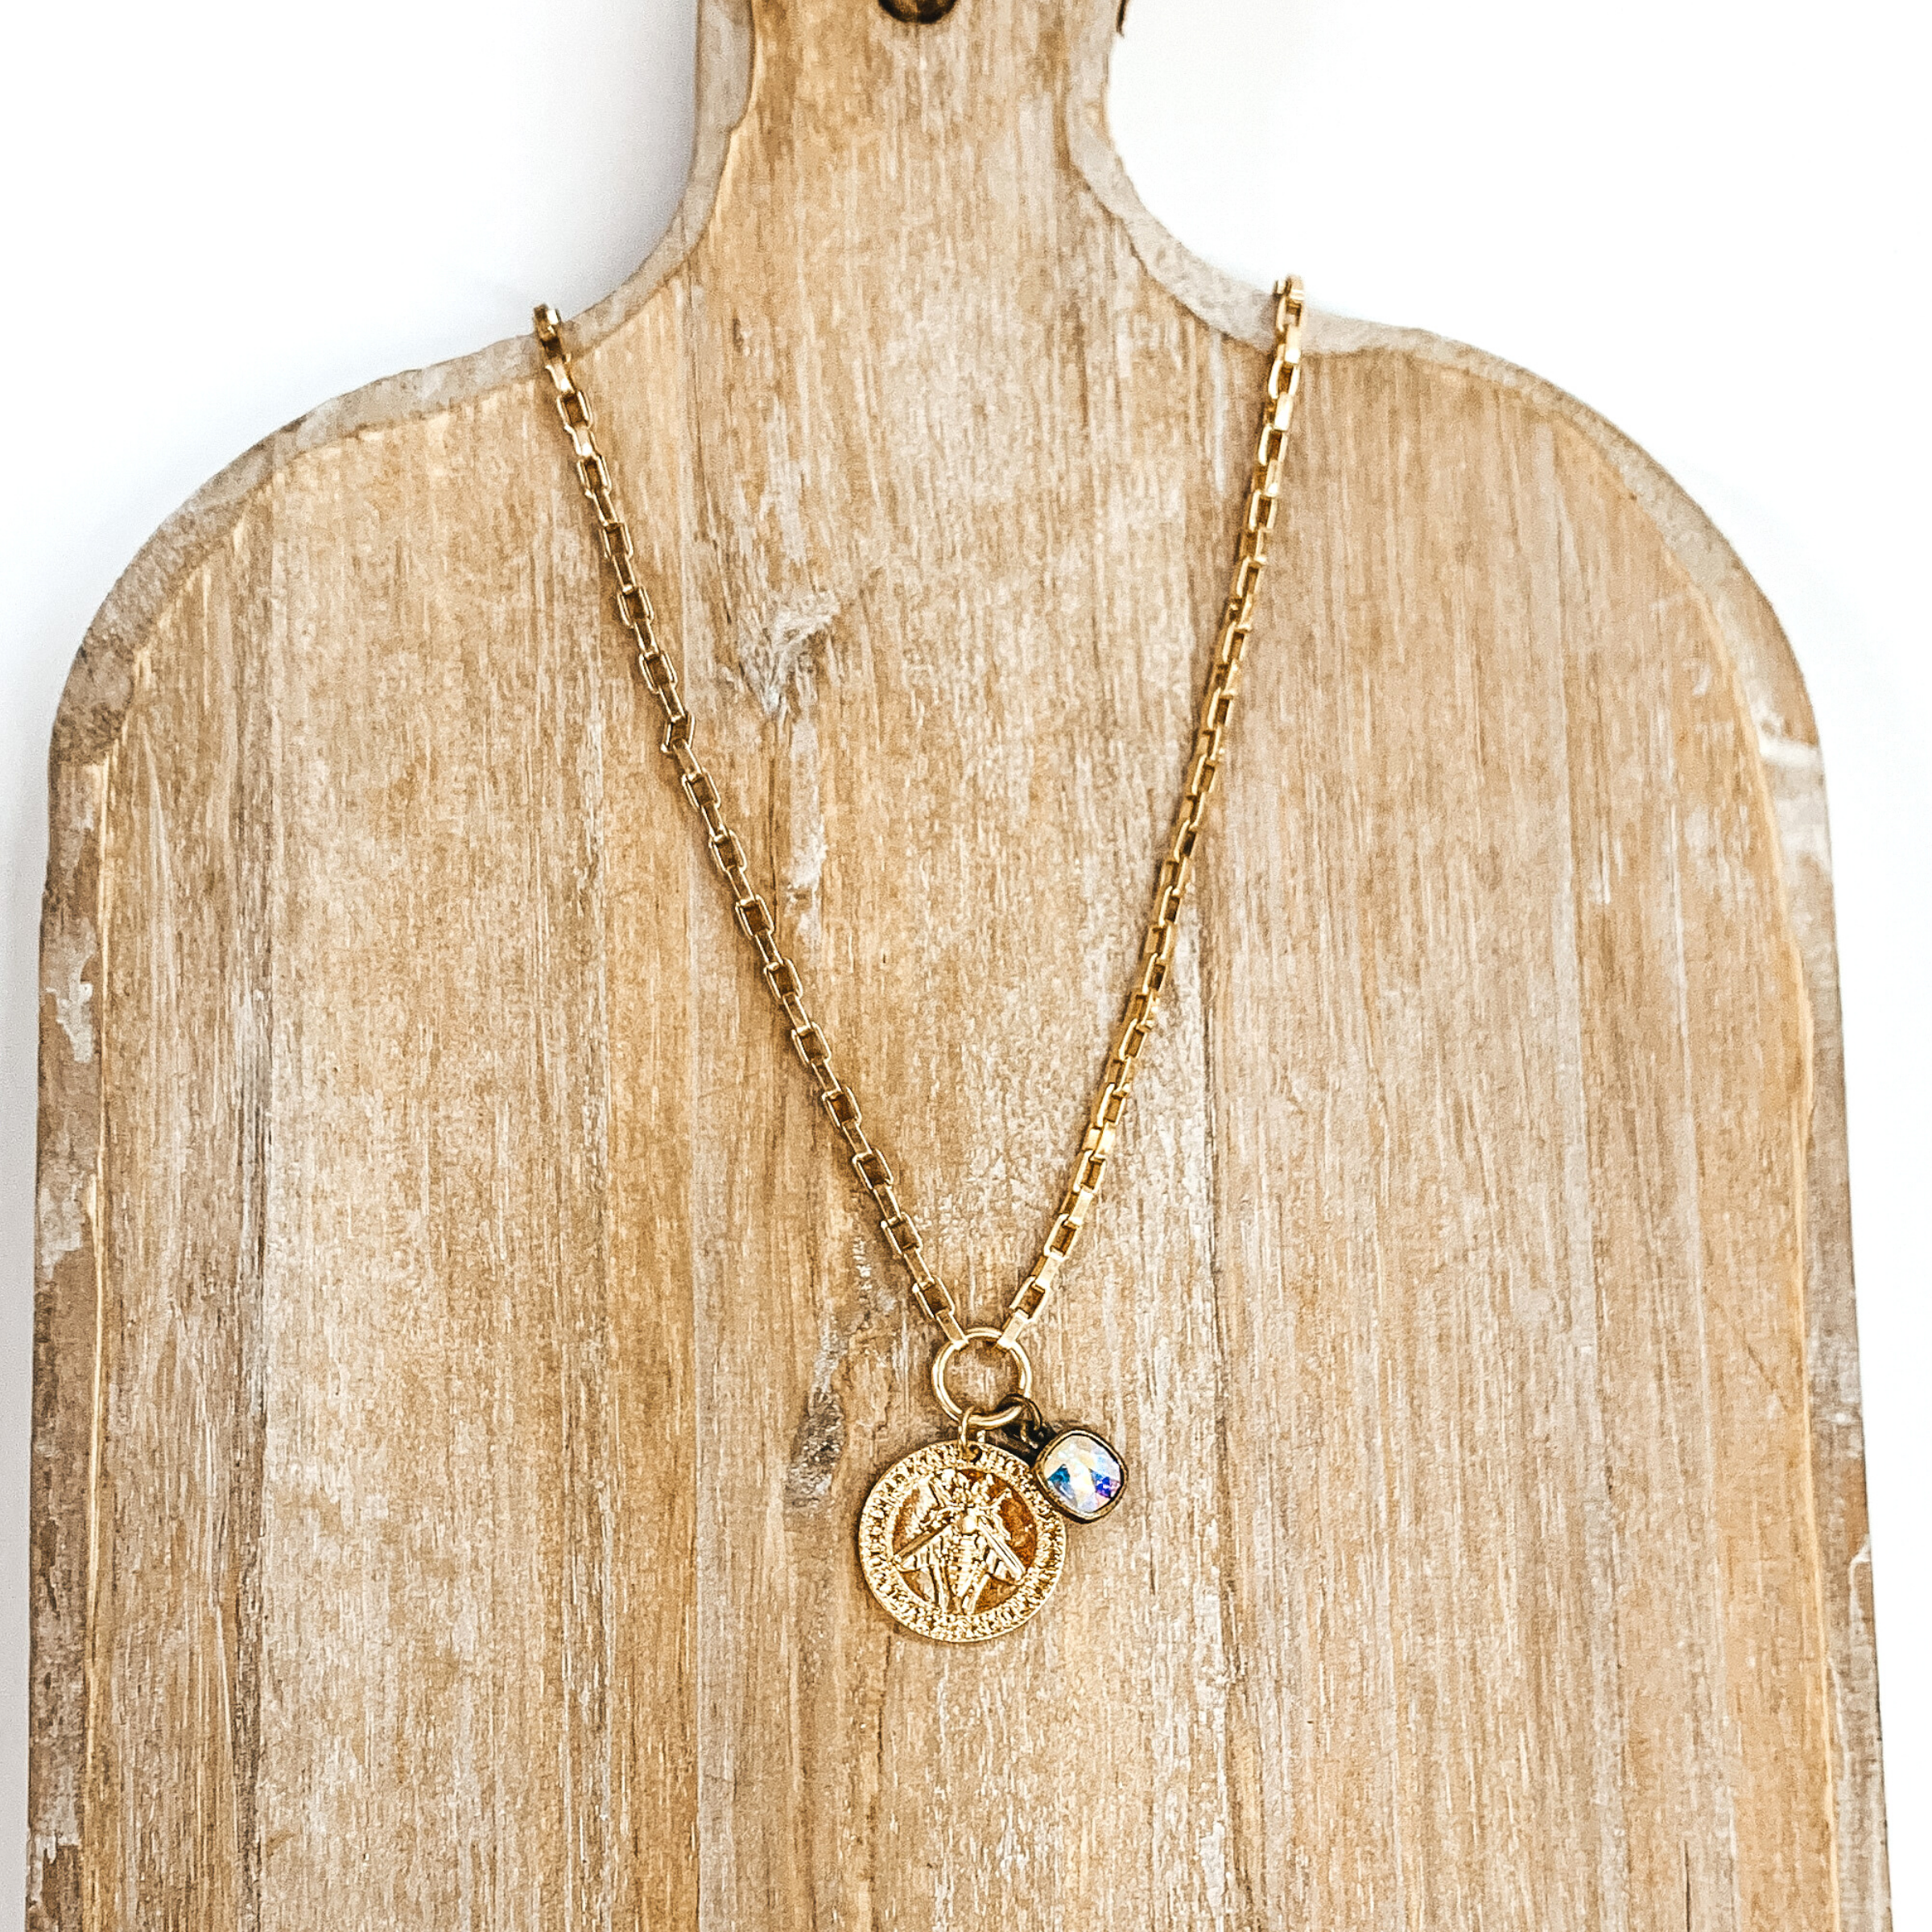 Gold chained necklace with a hanging gold coin pendant and hanging ab crystal. On the coin there is an engraved bee. This necklace is pictured on a tan necklace holder and on a white background. 